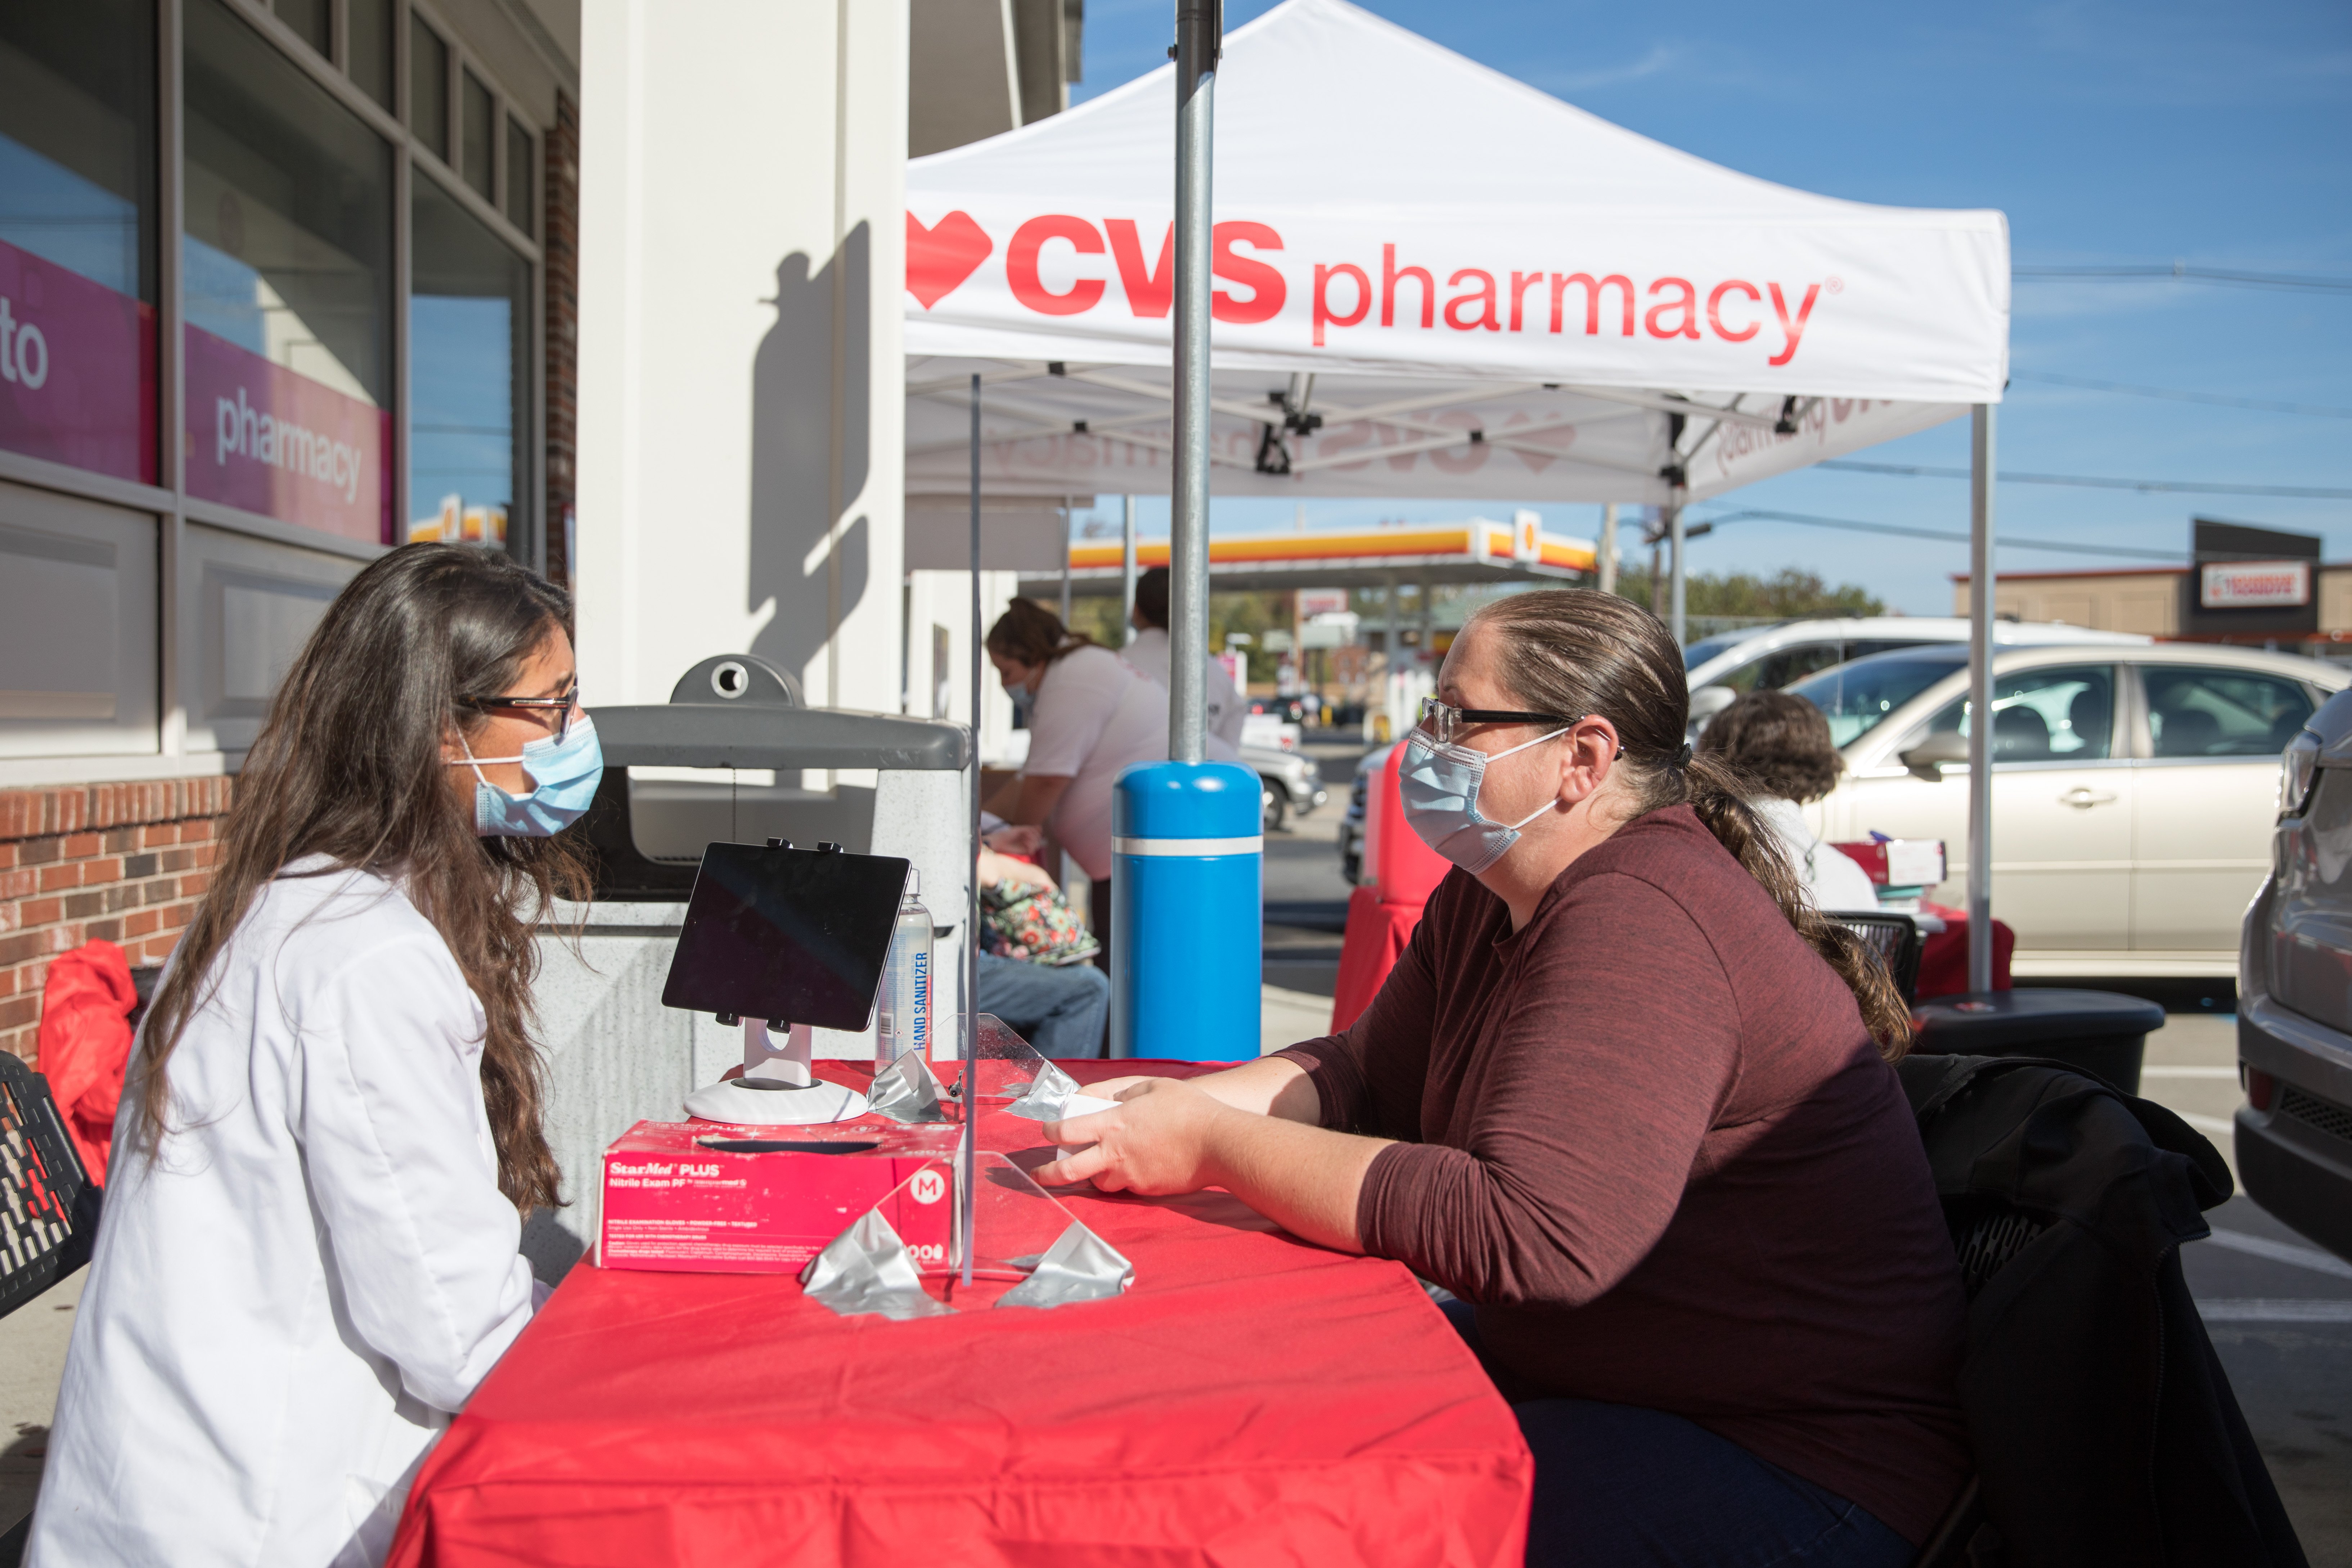 A woman attends a CVS Project Health screening event